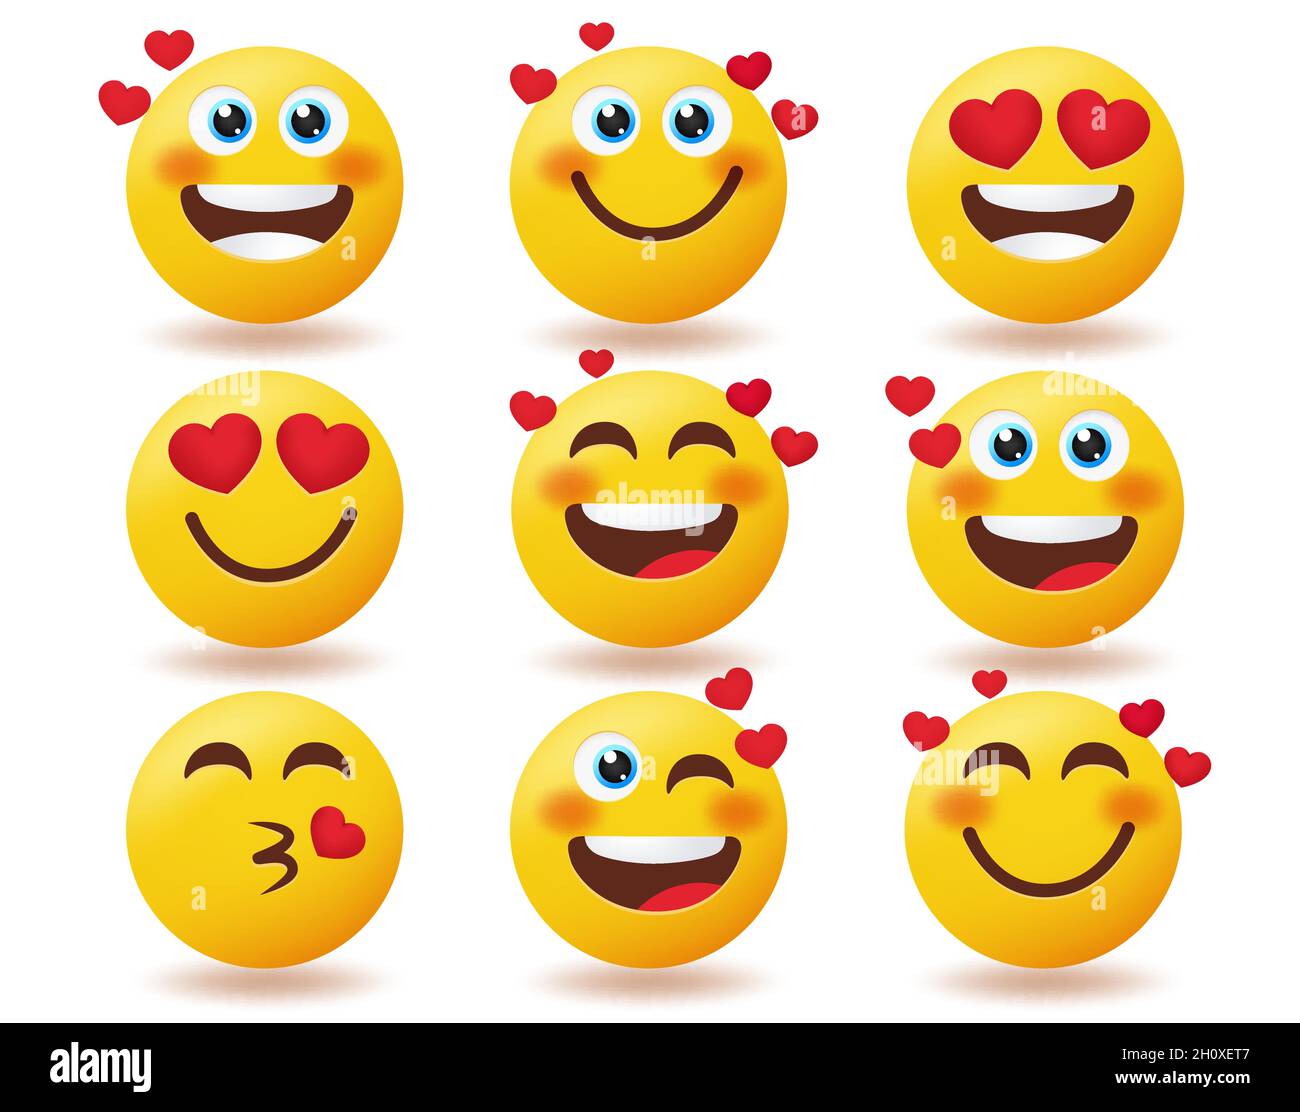 Emoji valentines inlove emoticon vector set. Emoticons love characters in smiling blushing and kissing facial expressions isolated in white background. Stock Vector